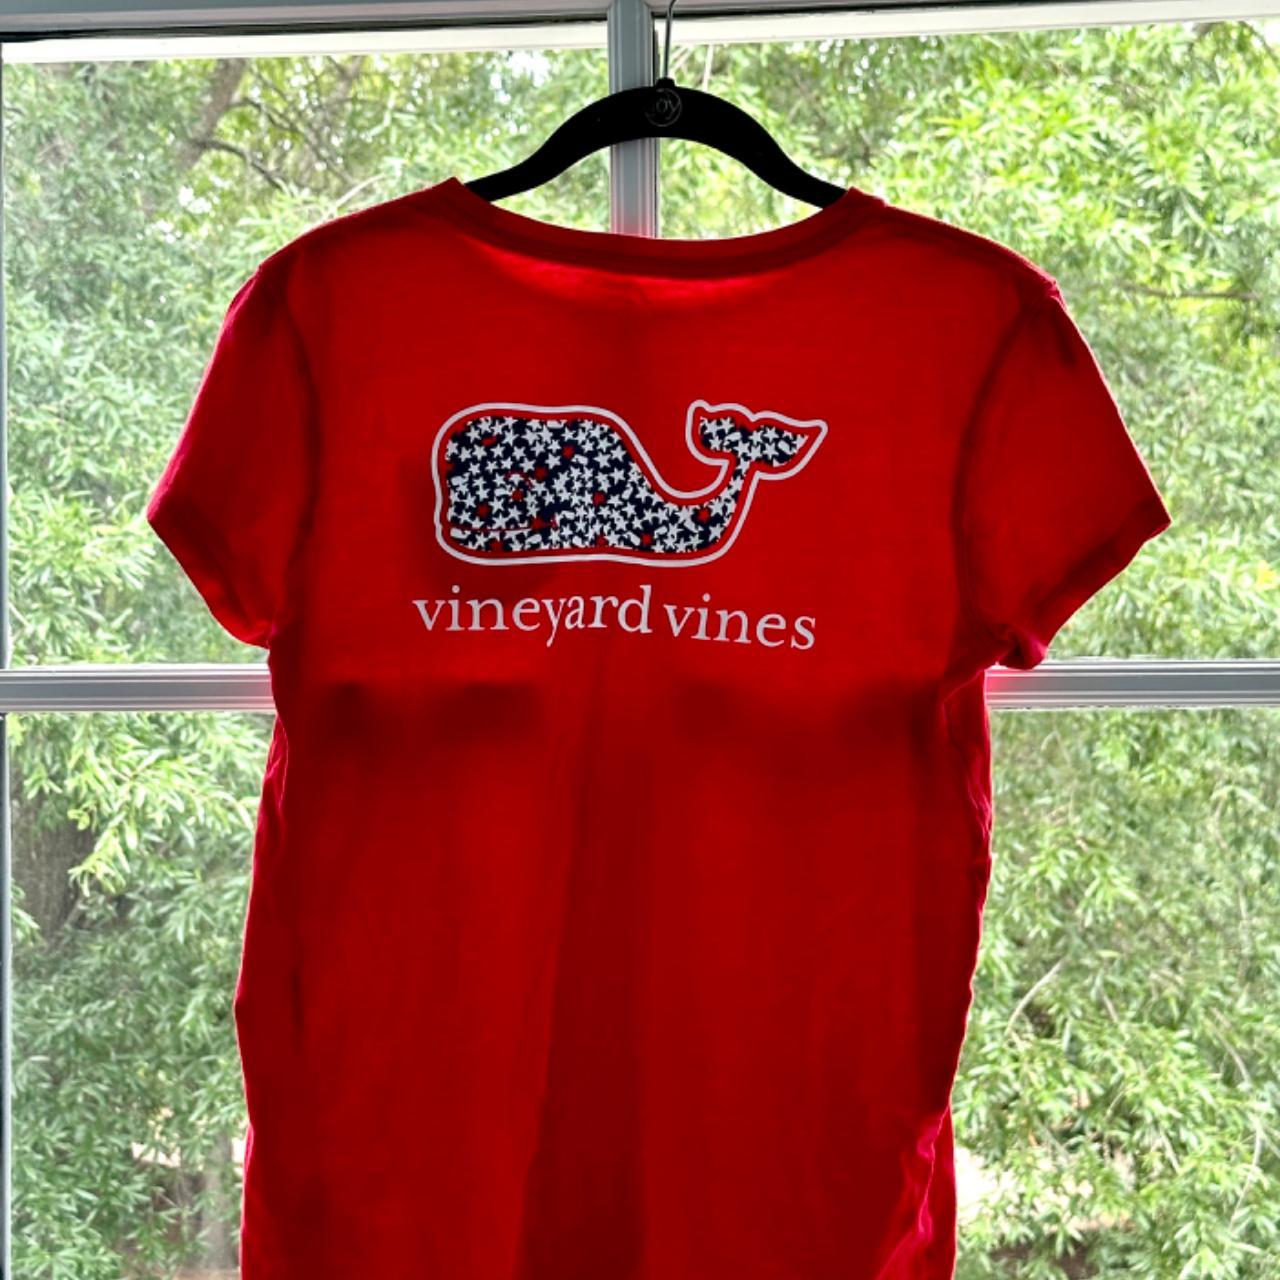 Excellent Quality Kids Vineyard Vines Red, White